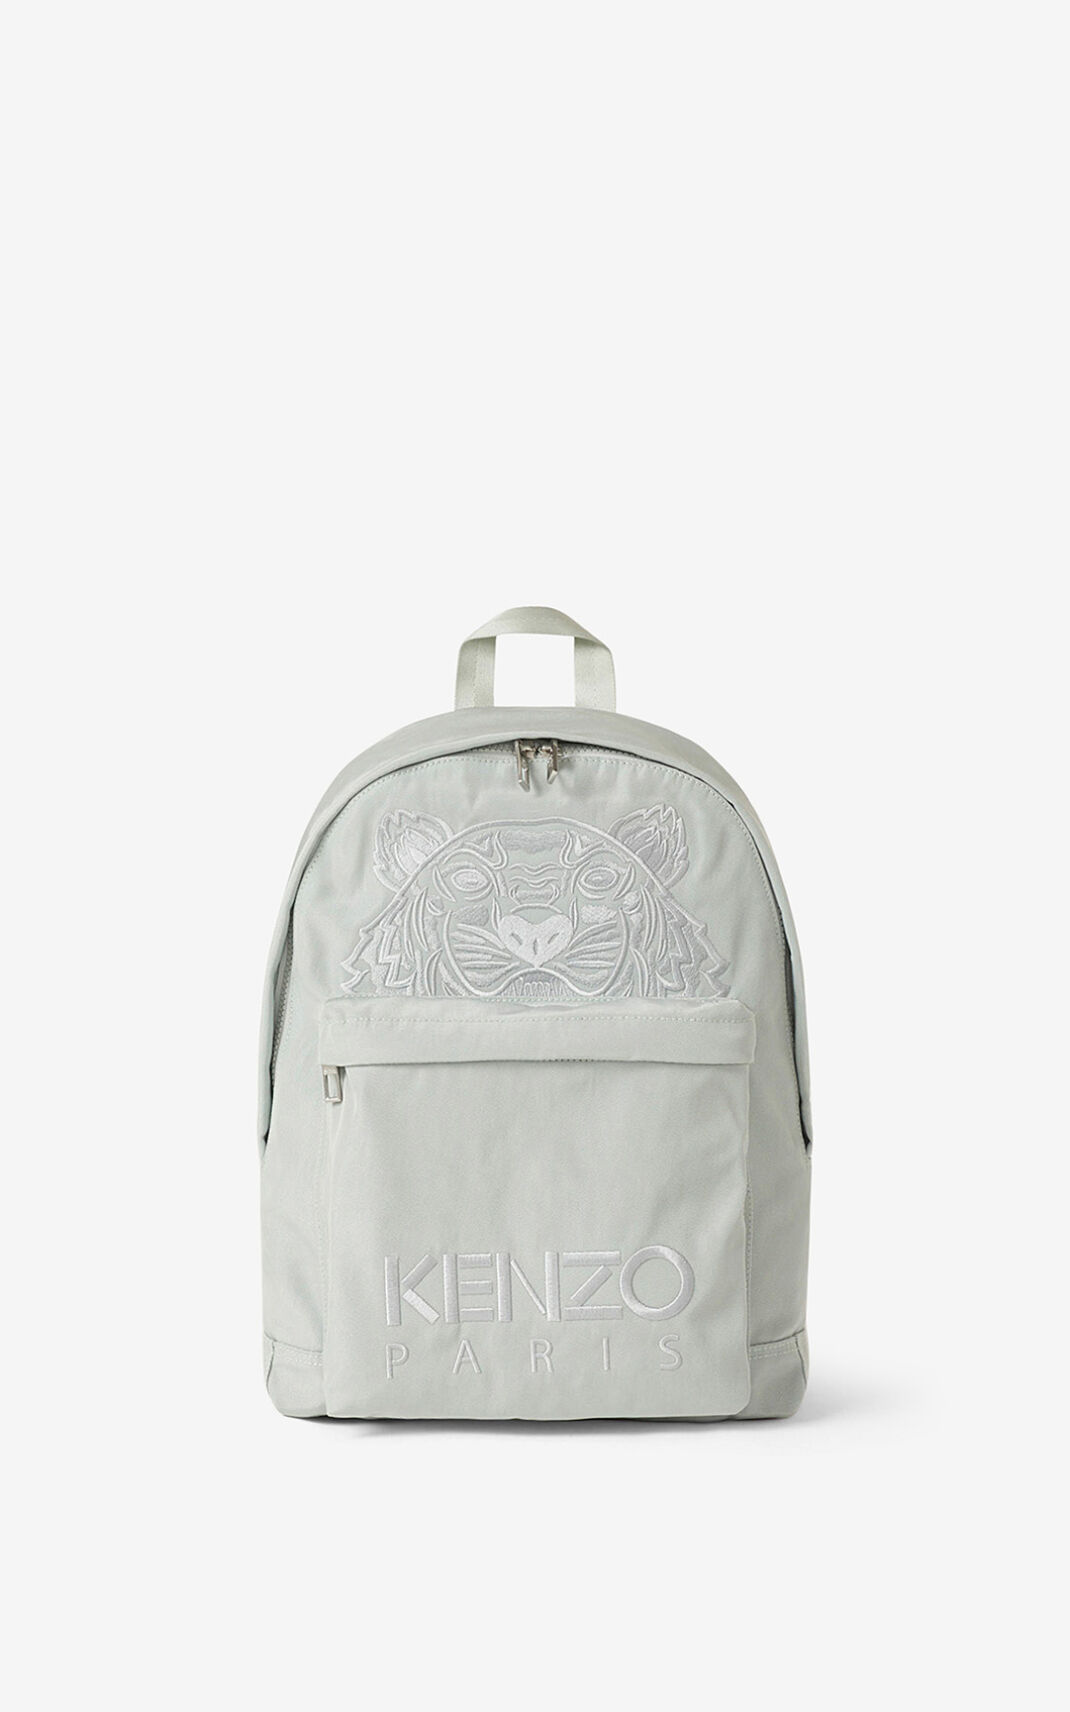 Kenzo Canvas Kampus Tiger Backpack Olive Green For Womens 9023NXIPE